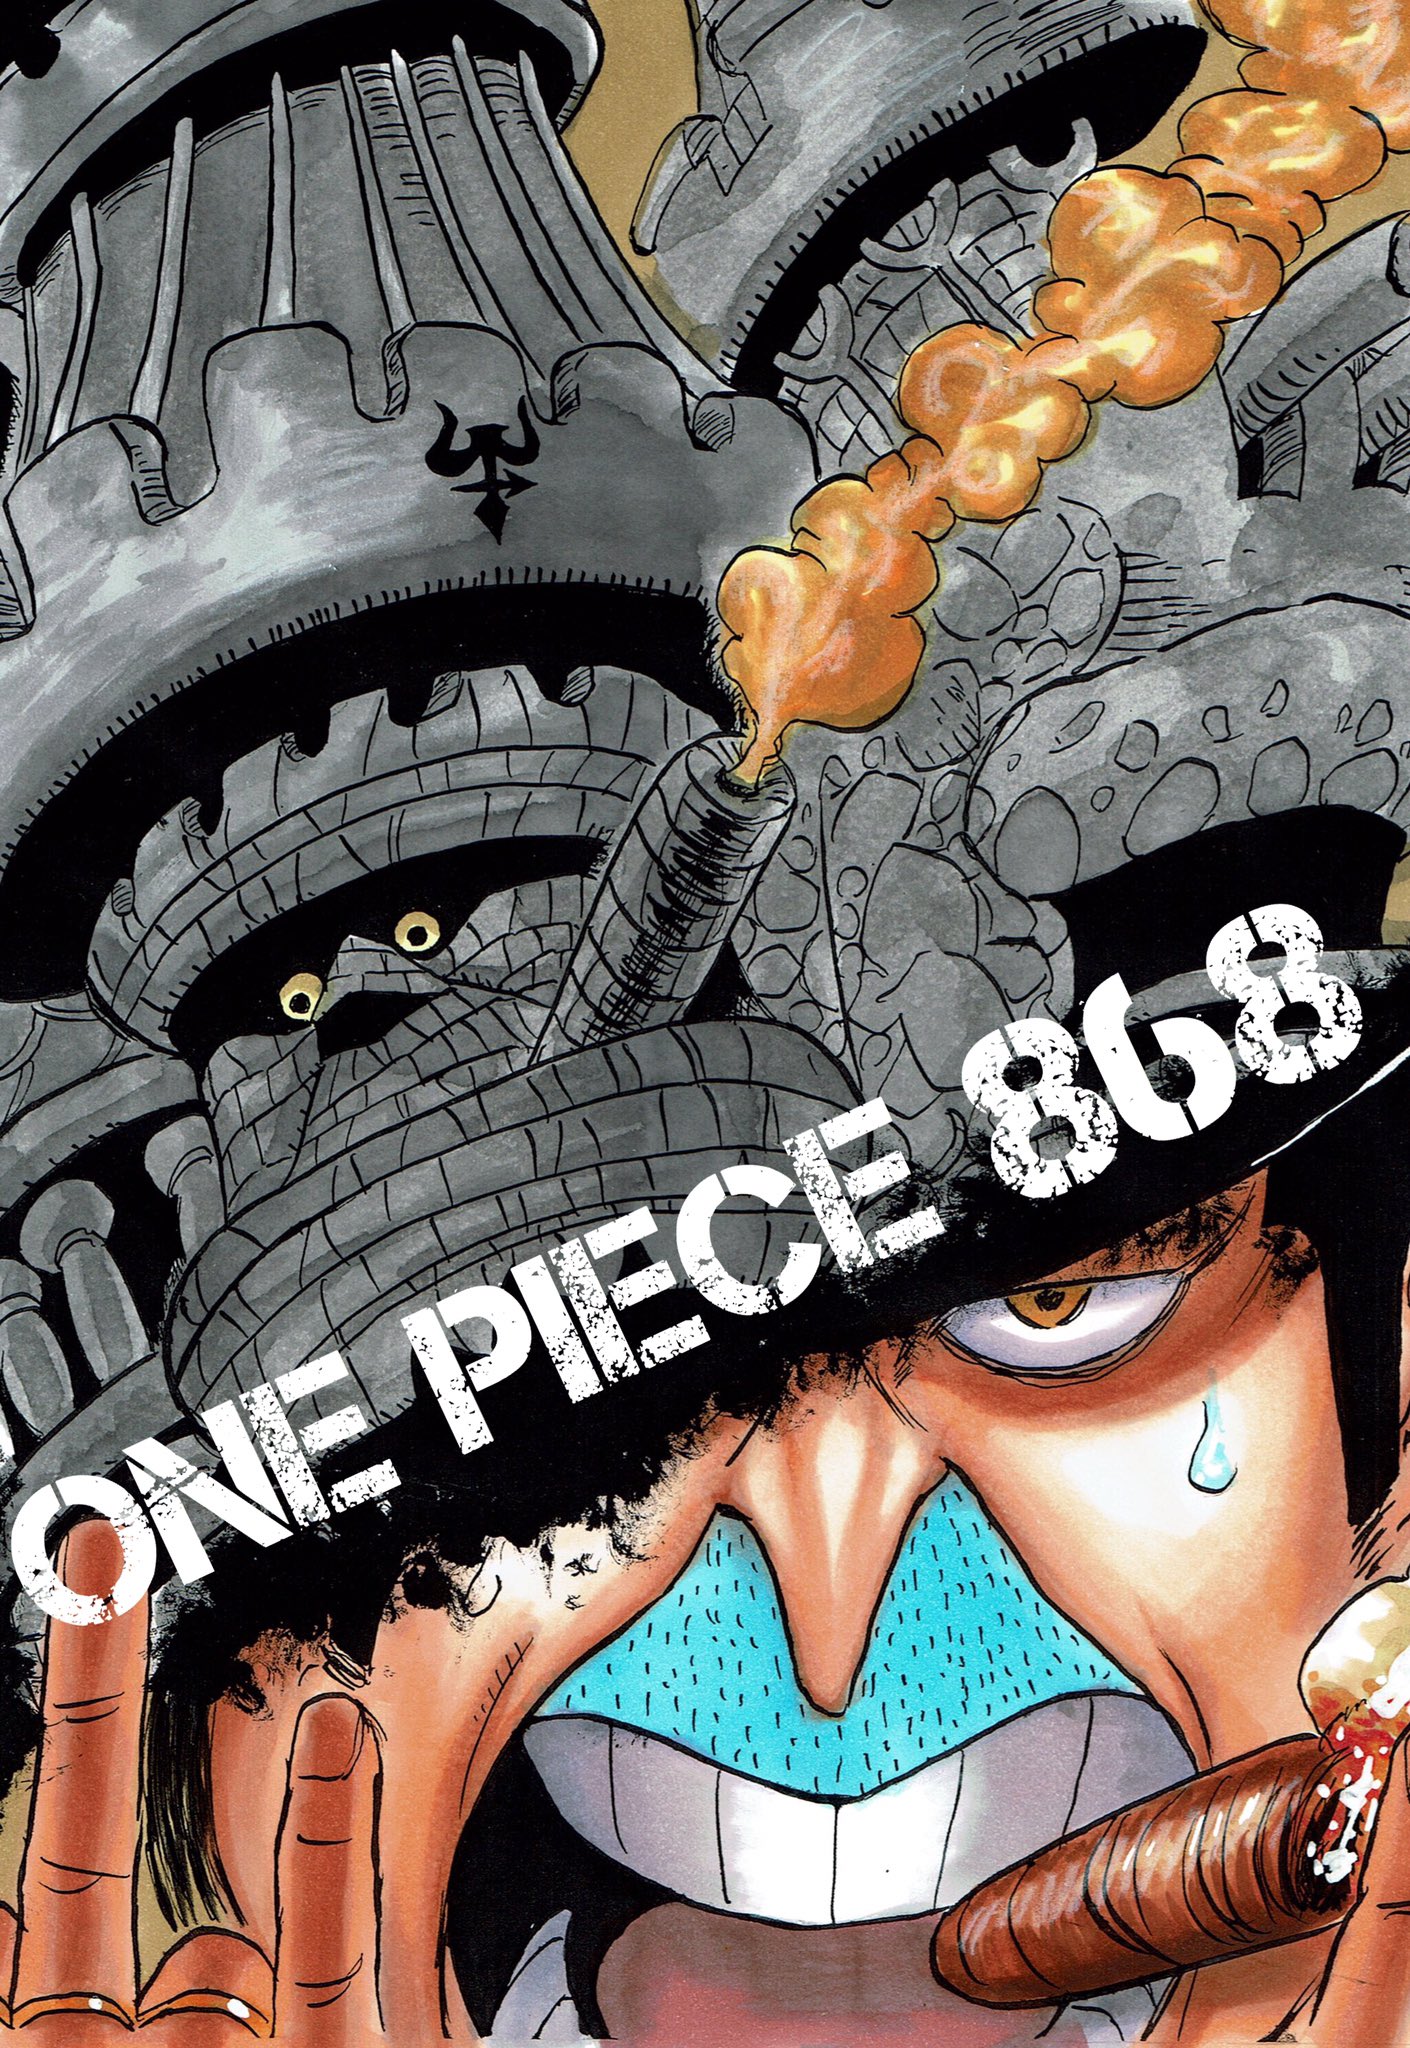 Hatsu S Colorpage 大頭目 One Piece 第868話 Kｘランチャー より T Co Jruex1hj3h Twitter